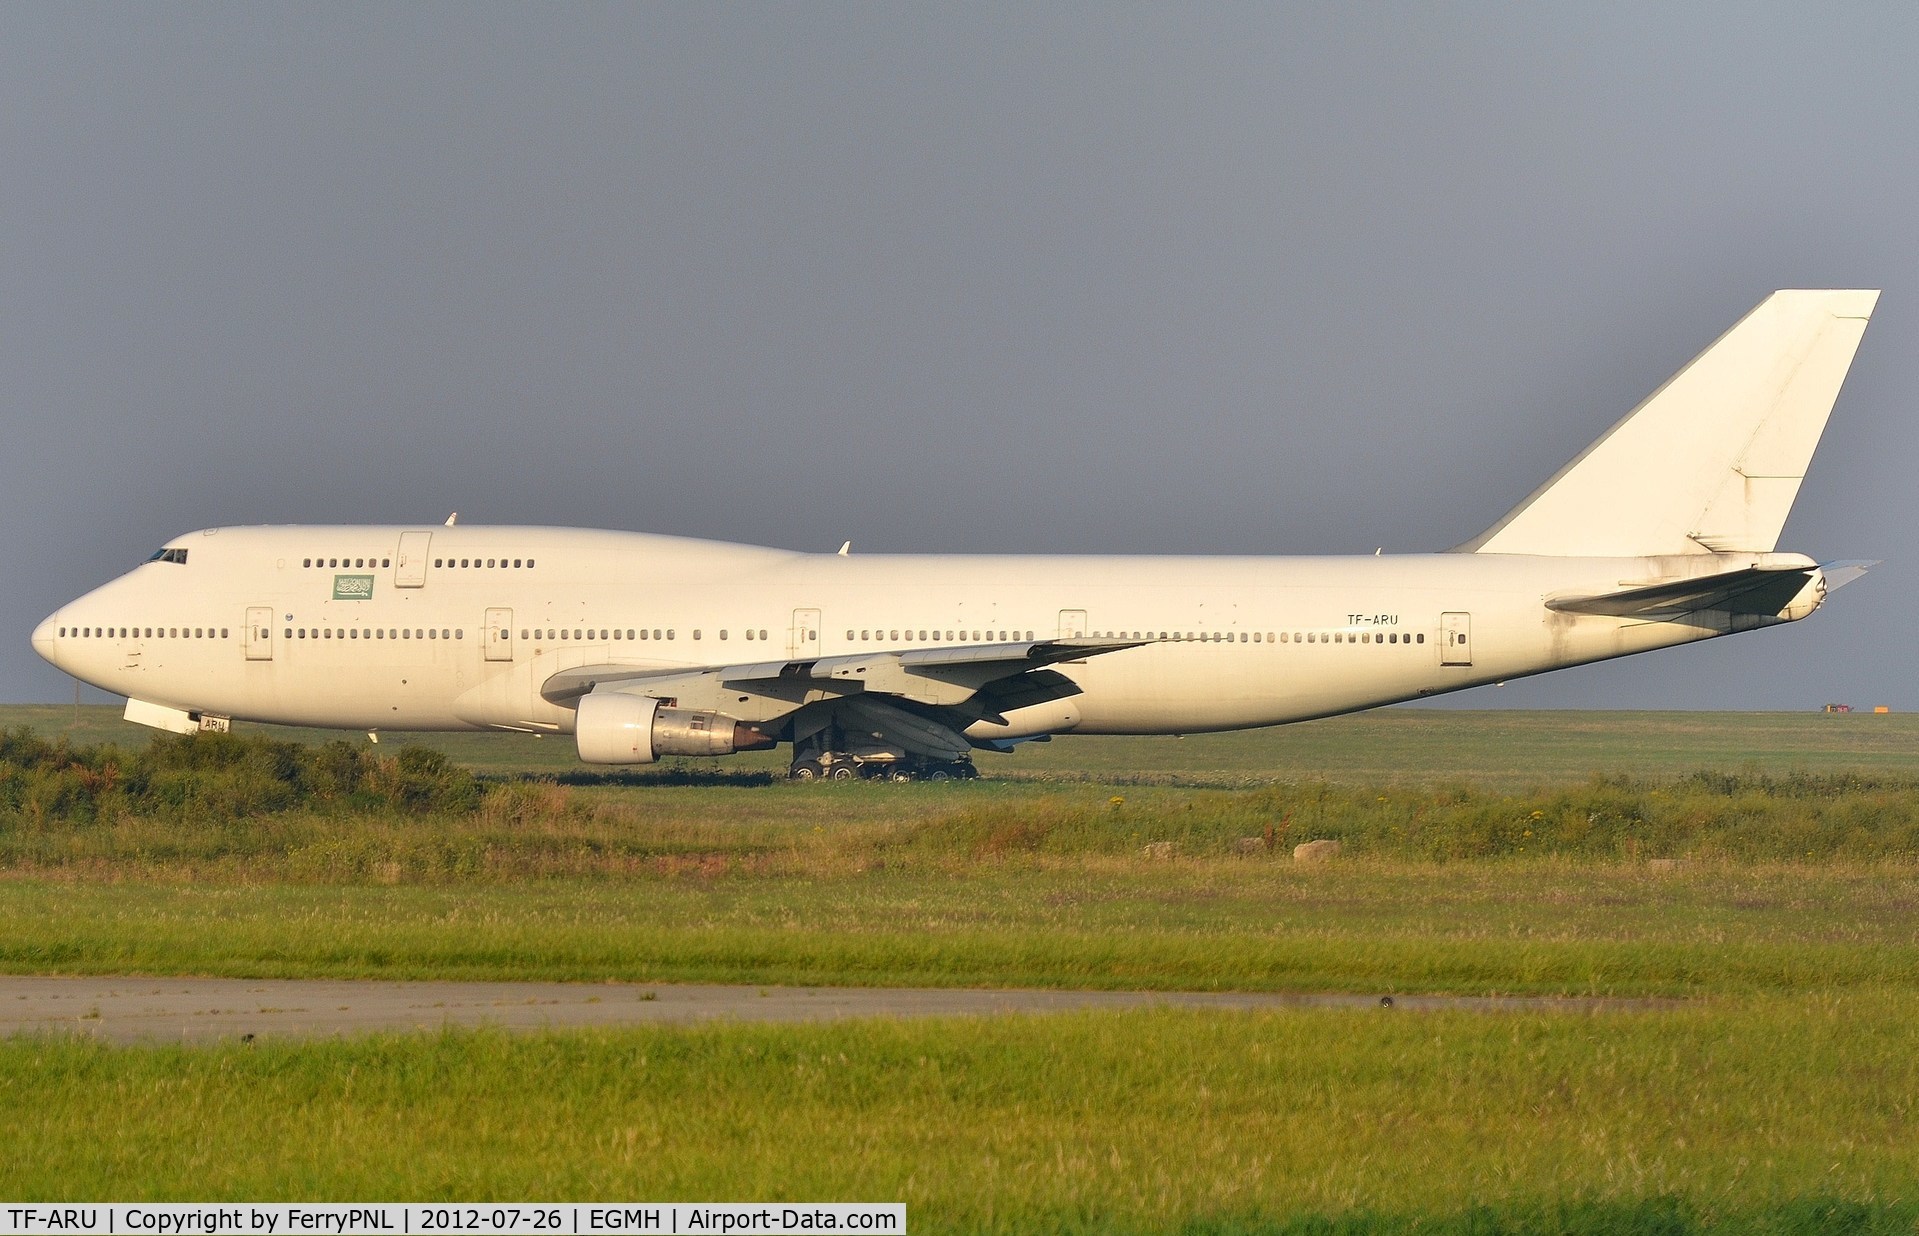 TF-ARU, 1983 Boeing 747-344 C/N 22970, Classic B743 hoping to find a new owner. Stored at Manston. Broken up at MSE Nov 2013.